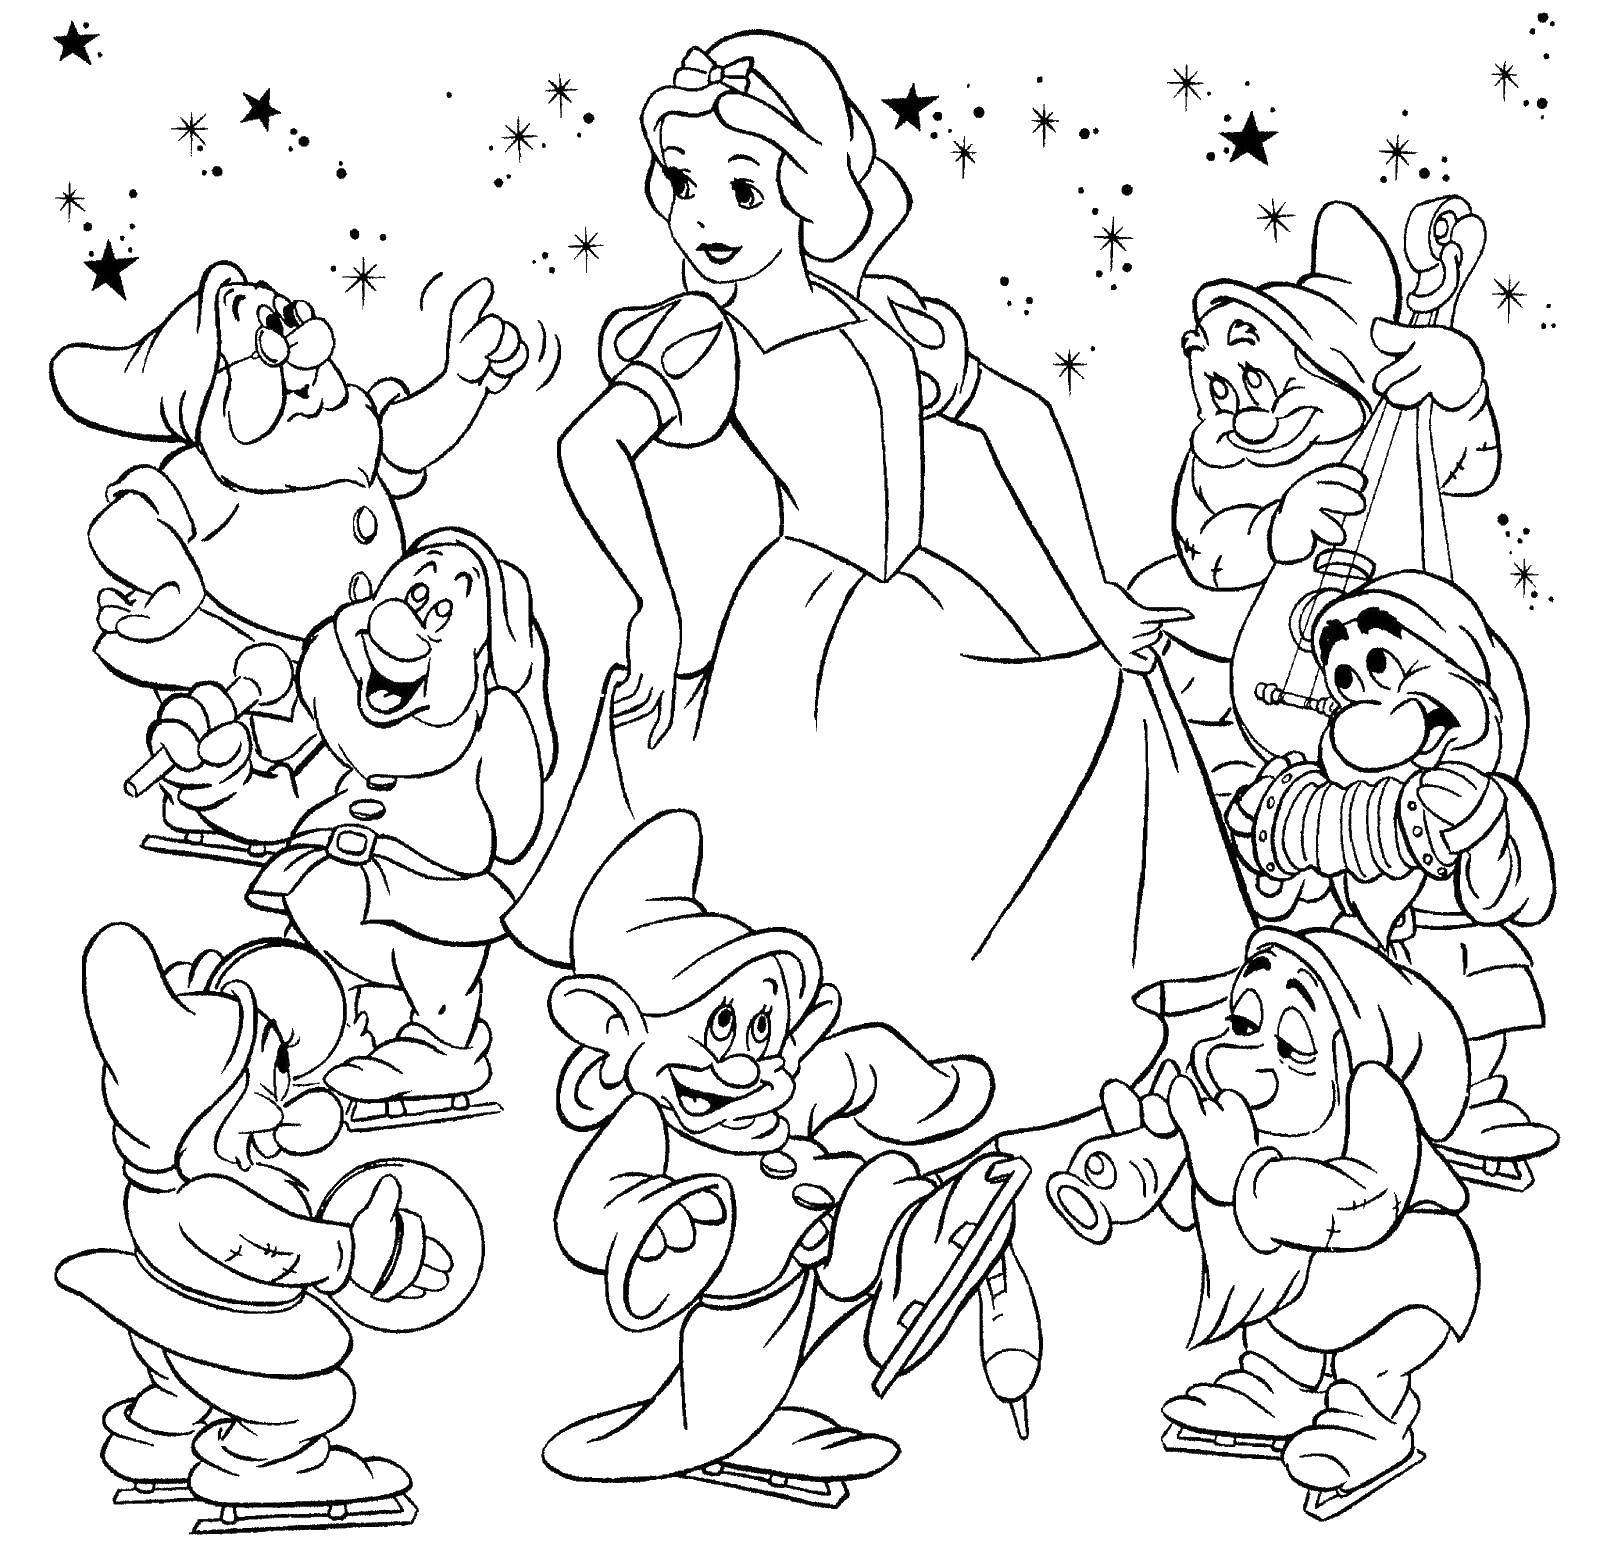 Coloring Snow white and the dwarves. Category snow white. Tags:  Snow white, the seven dwarfs.